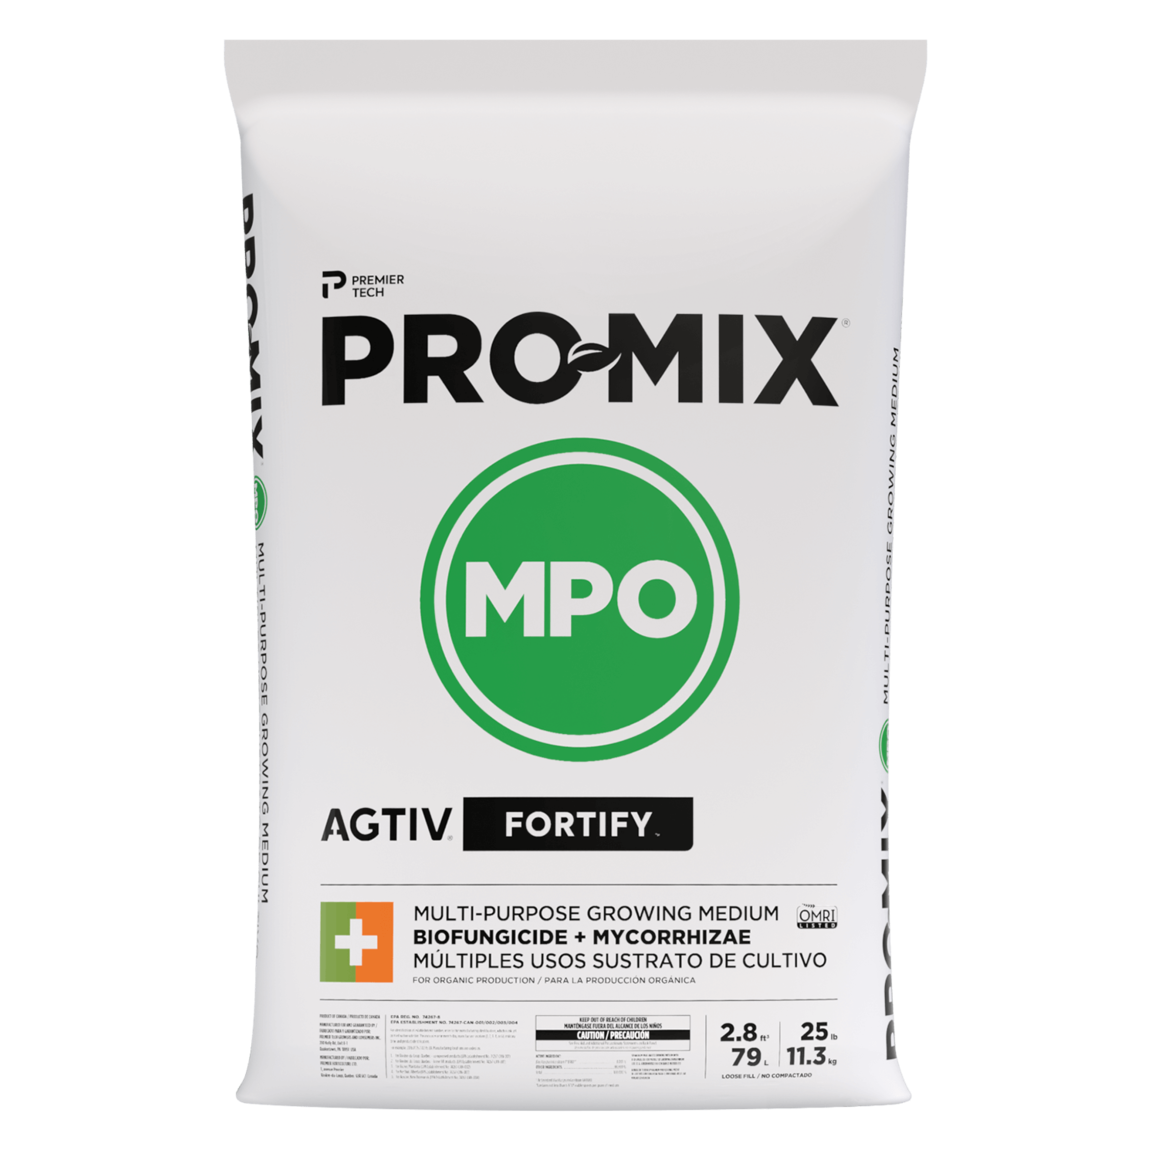 PRO-MIX MPO AGTIV FORTIFY 2.8 cu.ft.